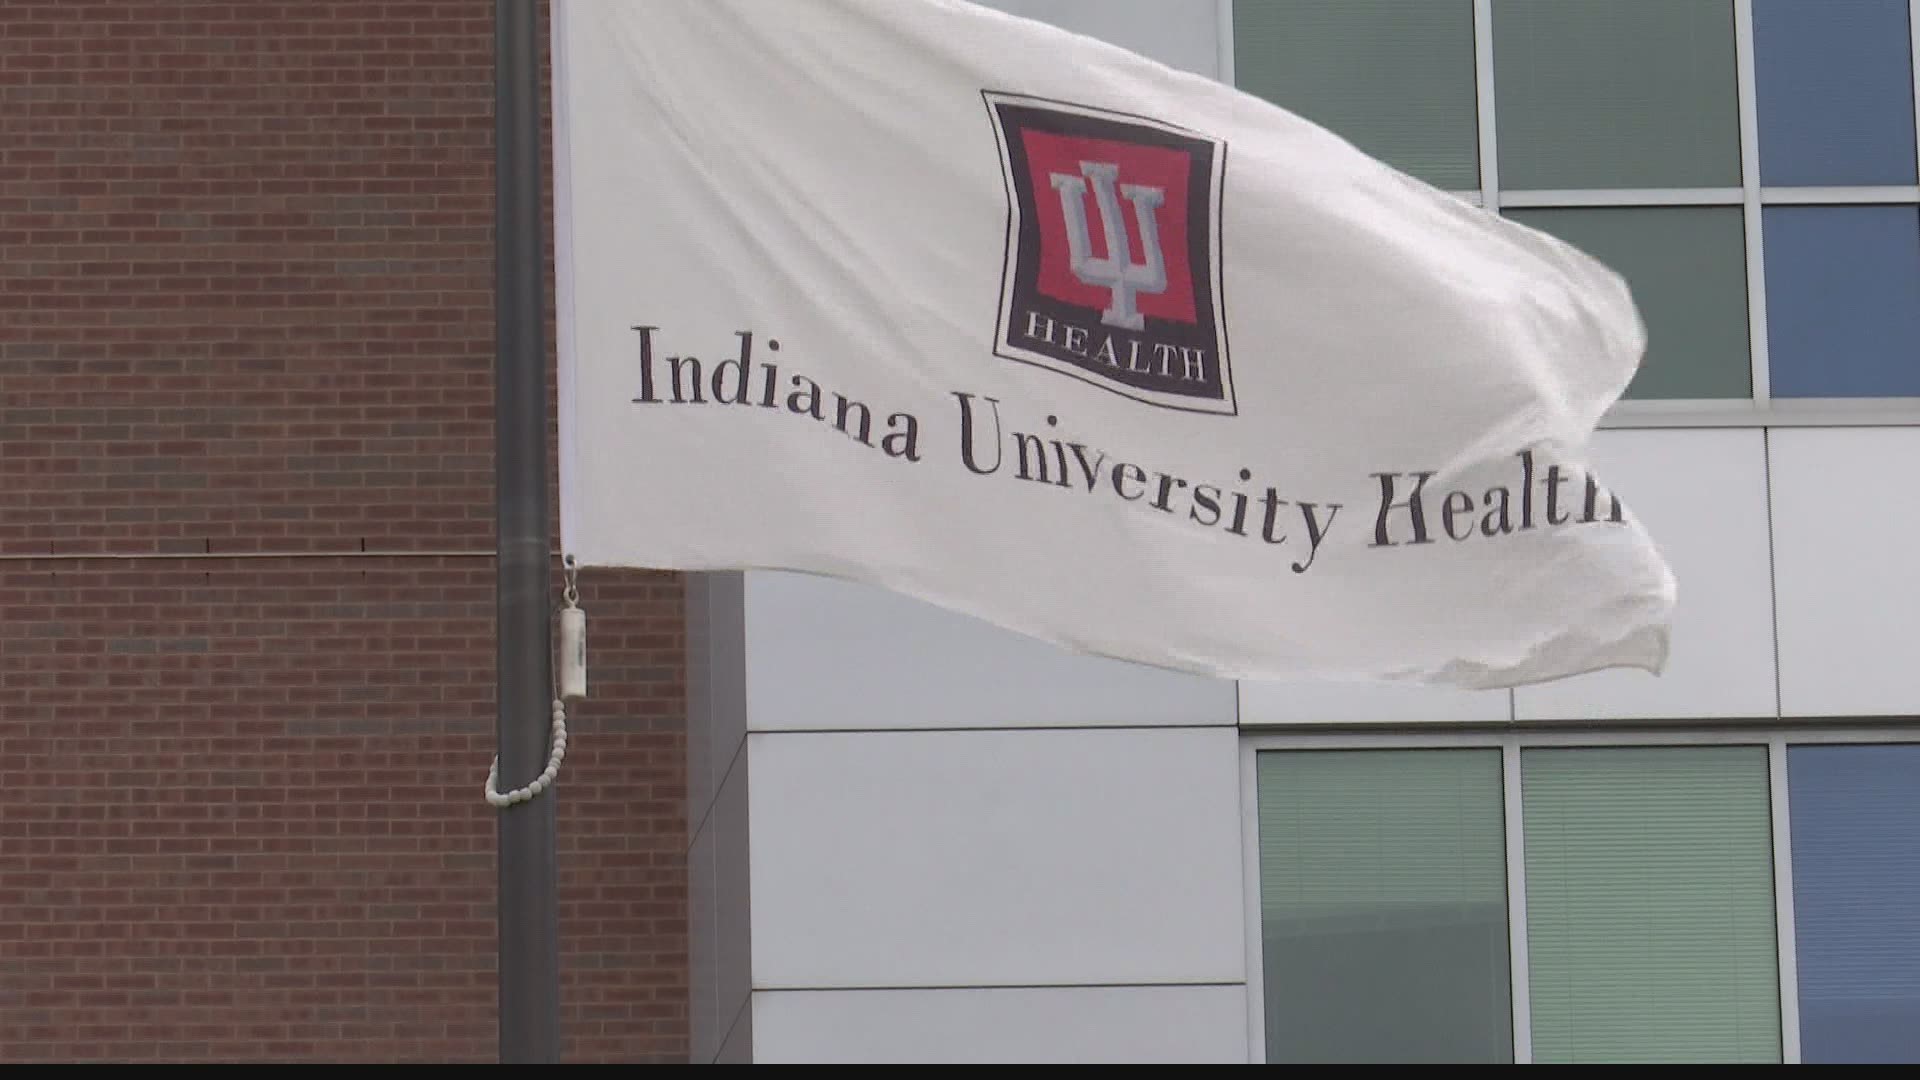 IU Health says about 61 percent of their employees are vaccinated